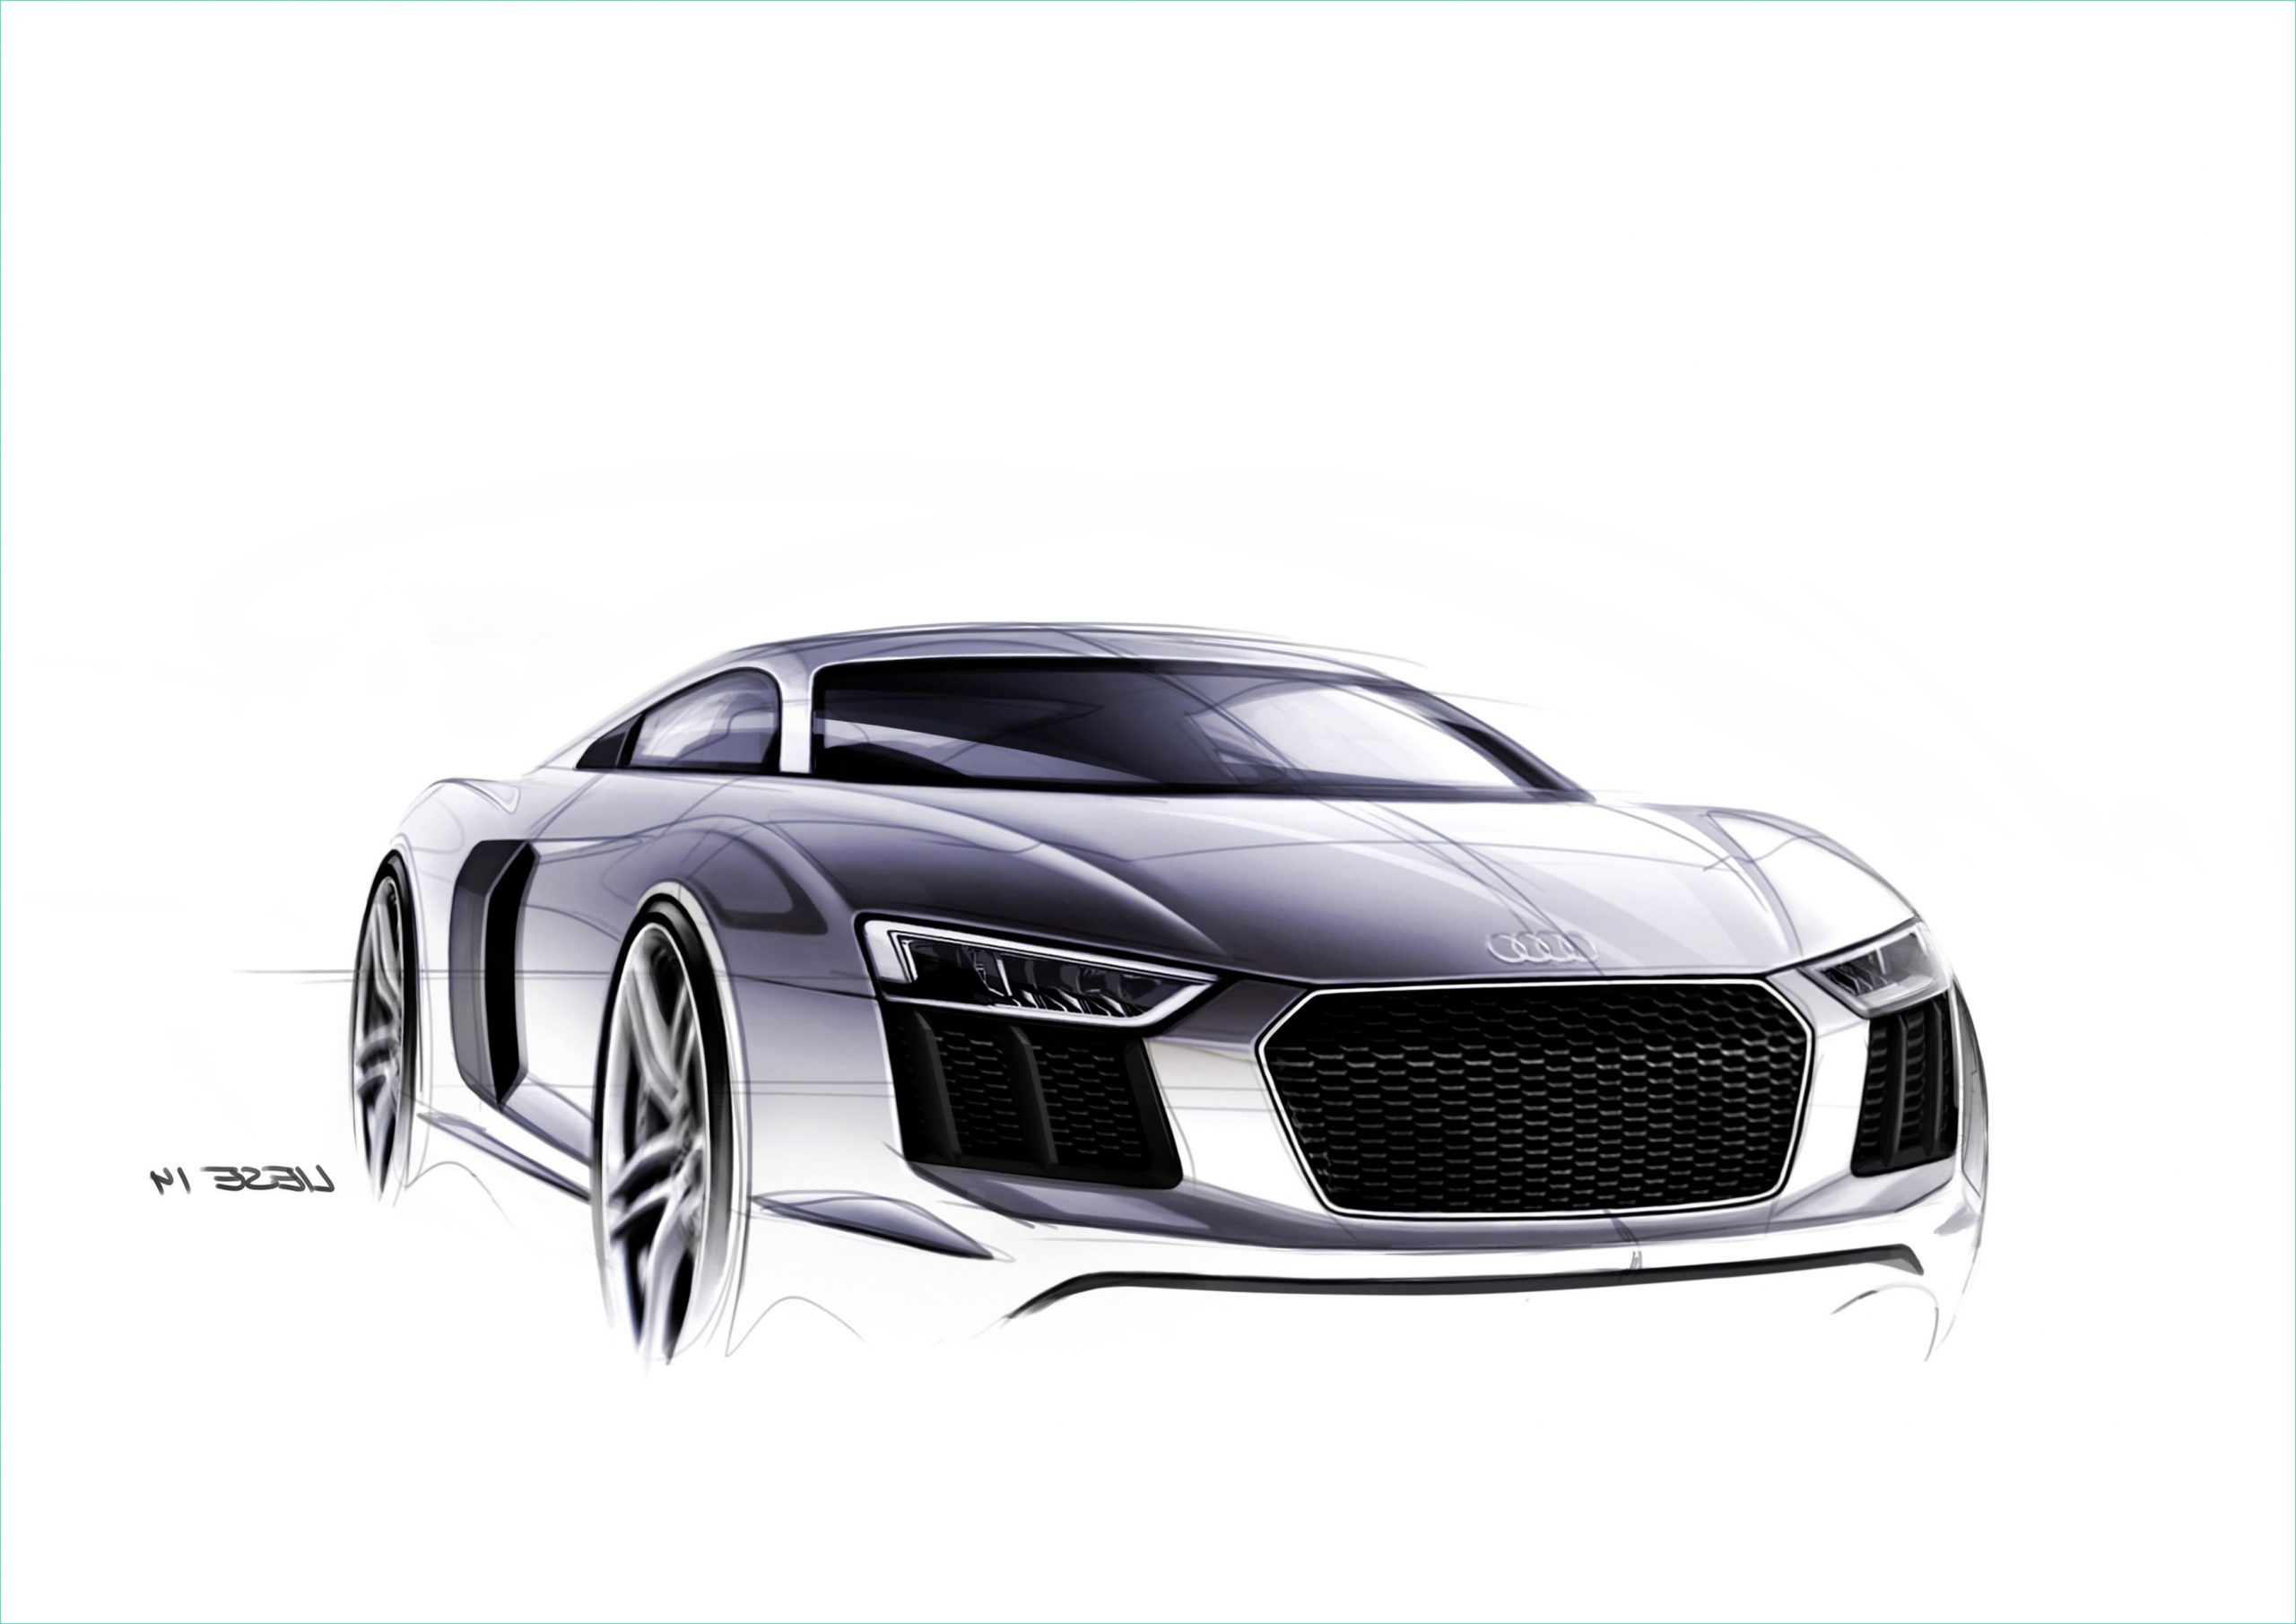 Dessin Audi R8 Beau Image 2016 Audi R8 Design Sketches are something to Geek Over